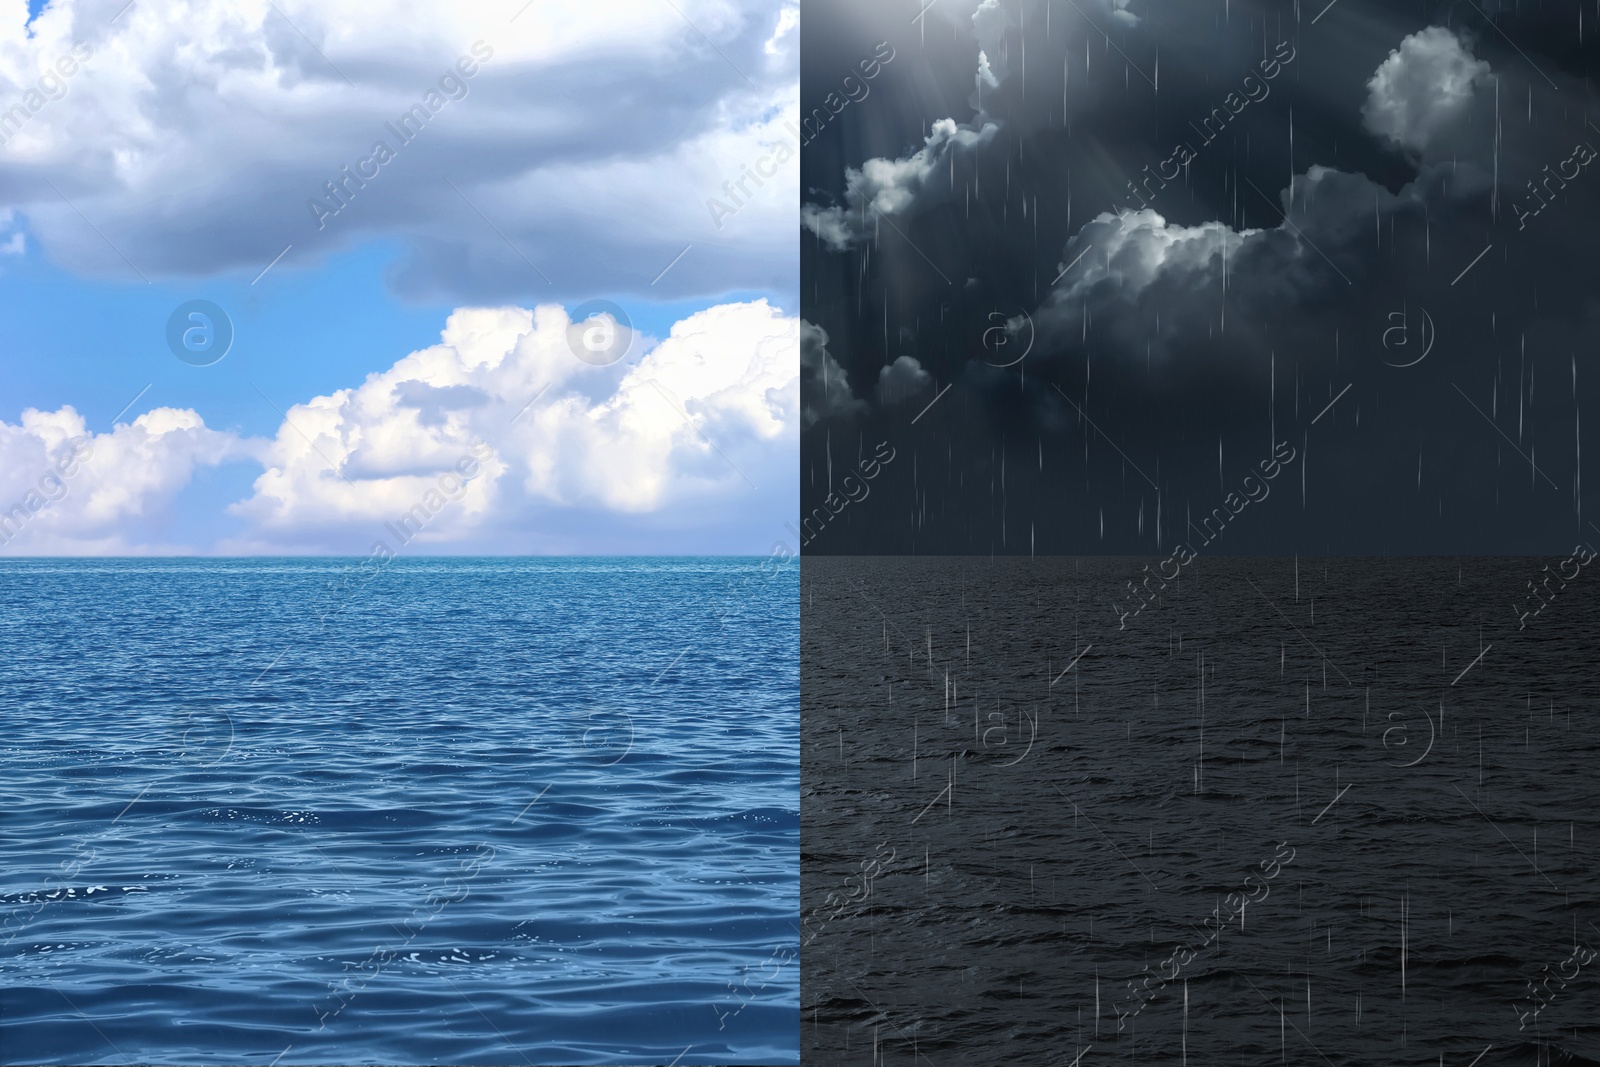 Image of Sea under sky with clouds on one side and during pouring rain on other, collage. Weather changes